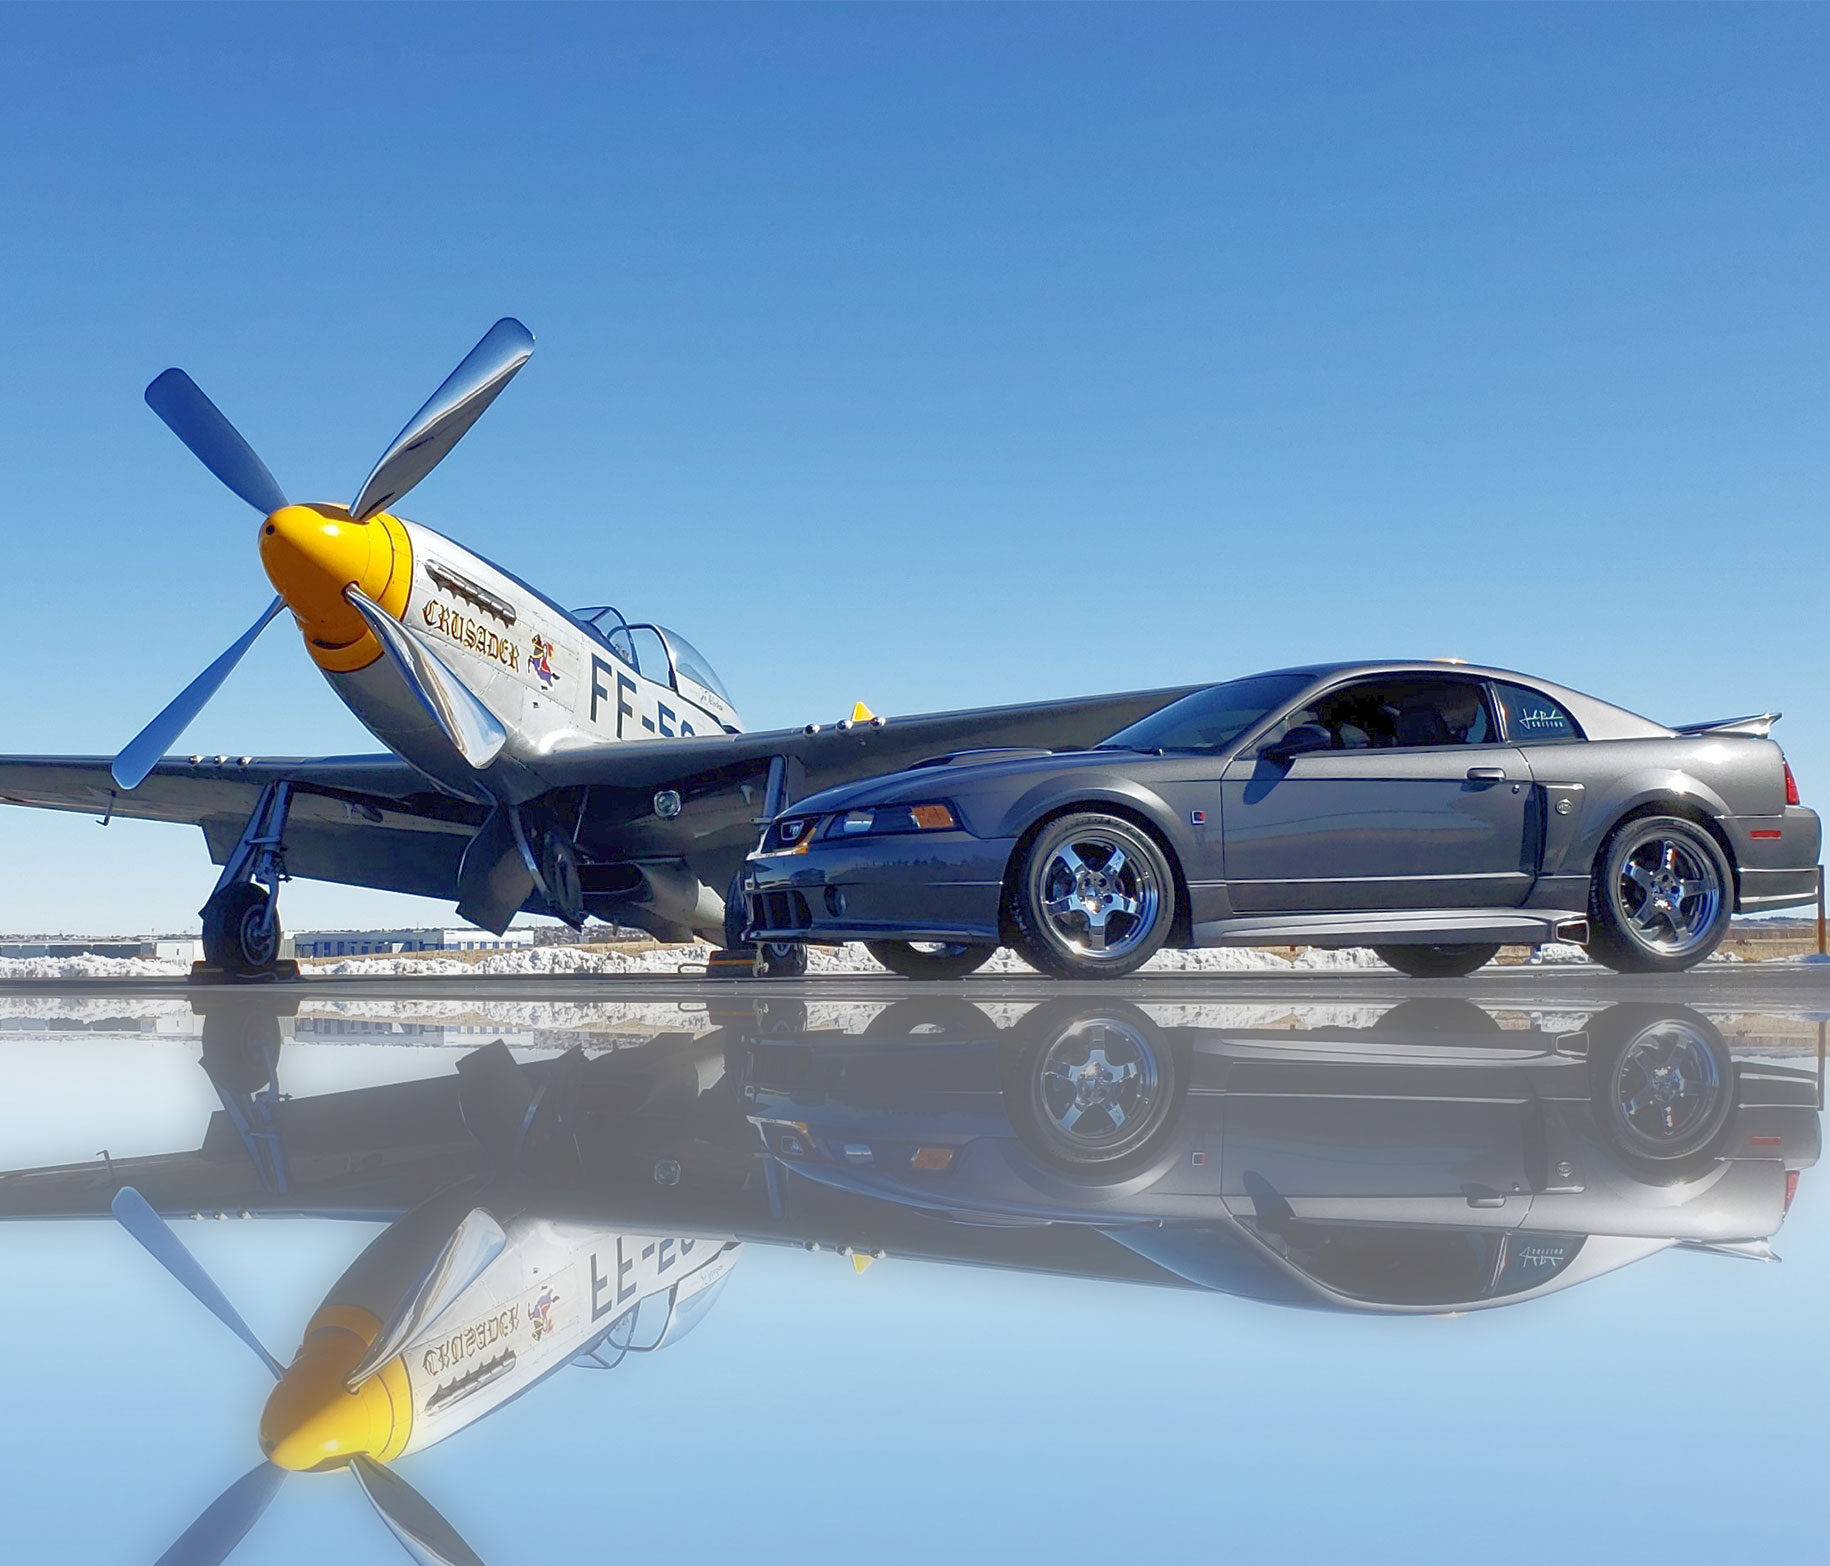 Aircraft and Mustang car on the ramp